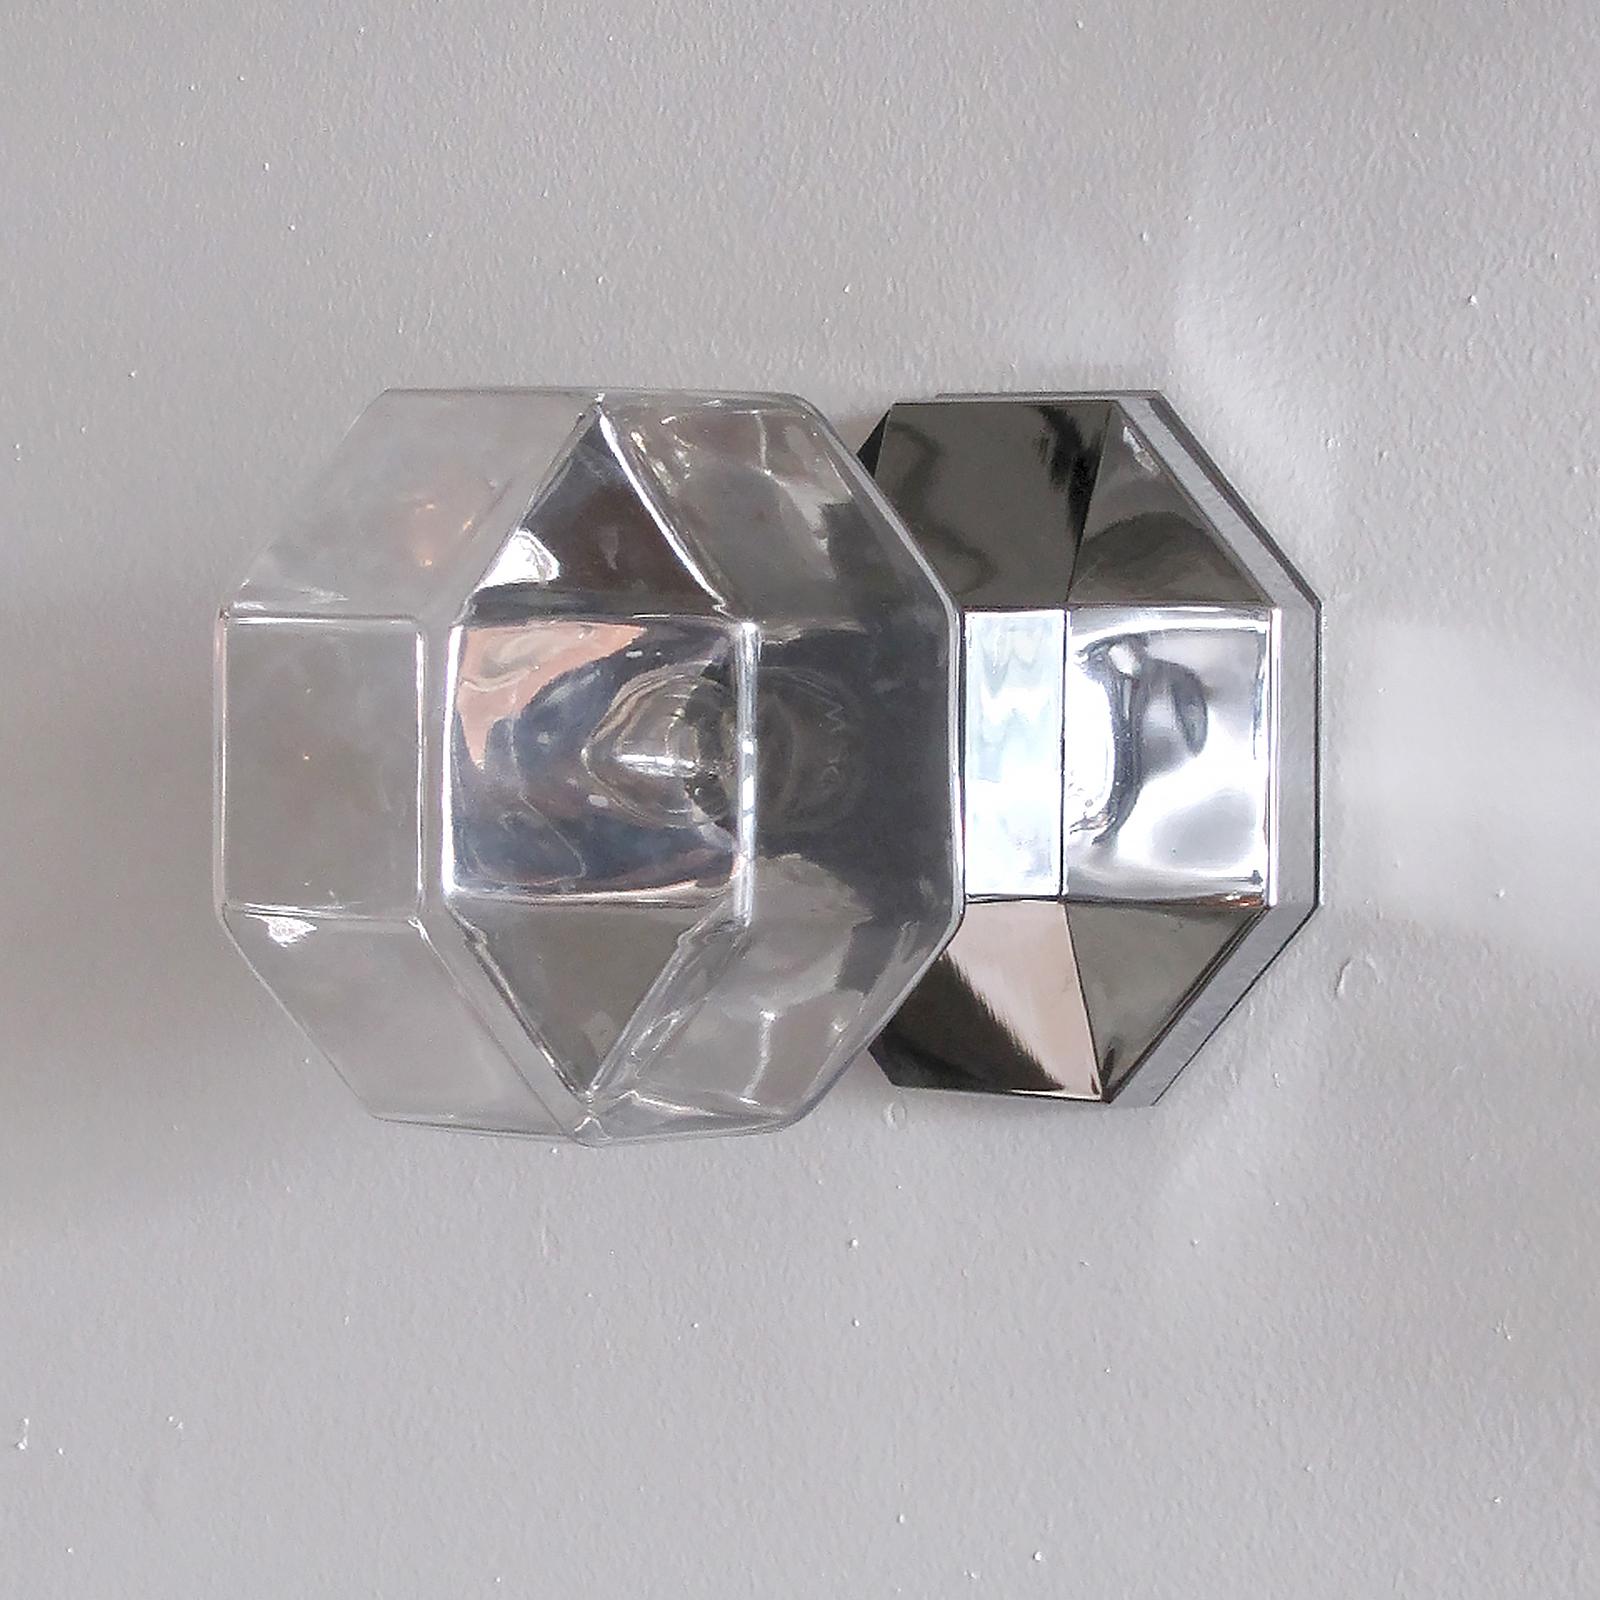 Mid-Century Modern Modular Staff Wall or Ceiling Lights by Motoko Ishii, 1970 For Sale